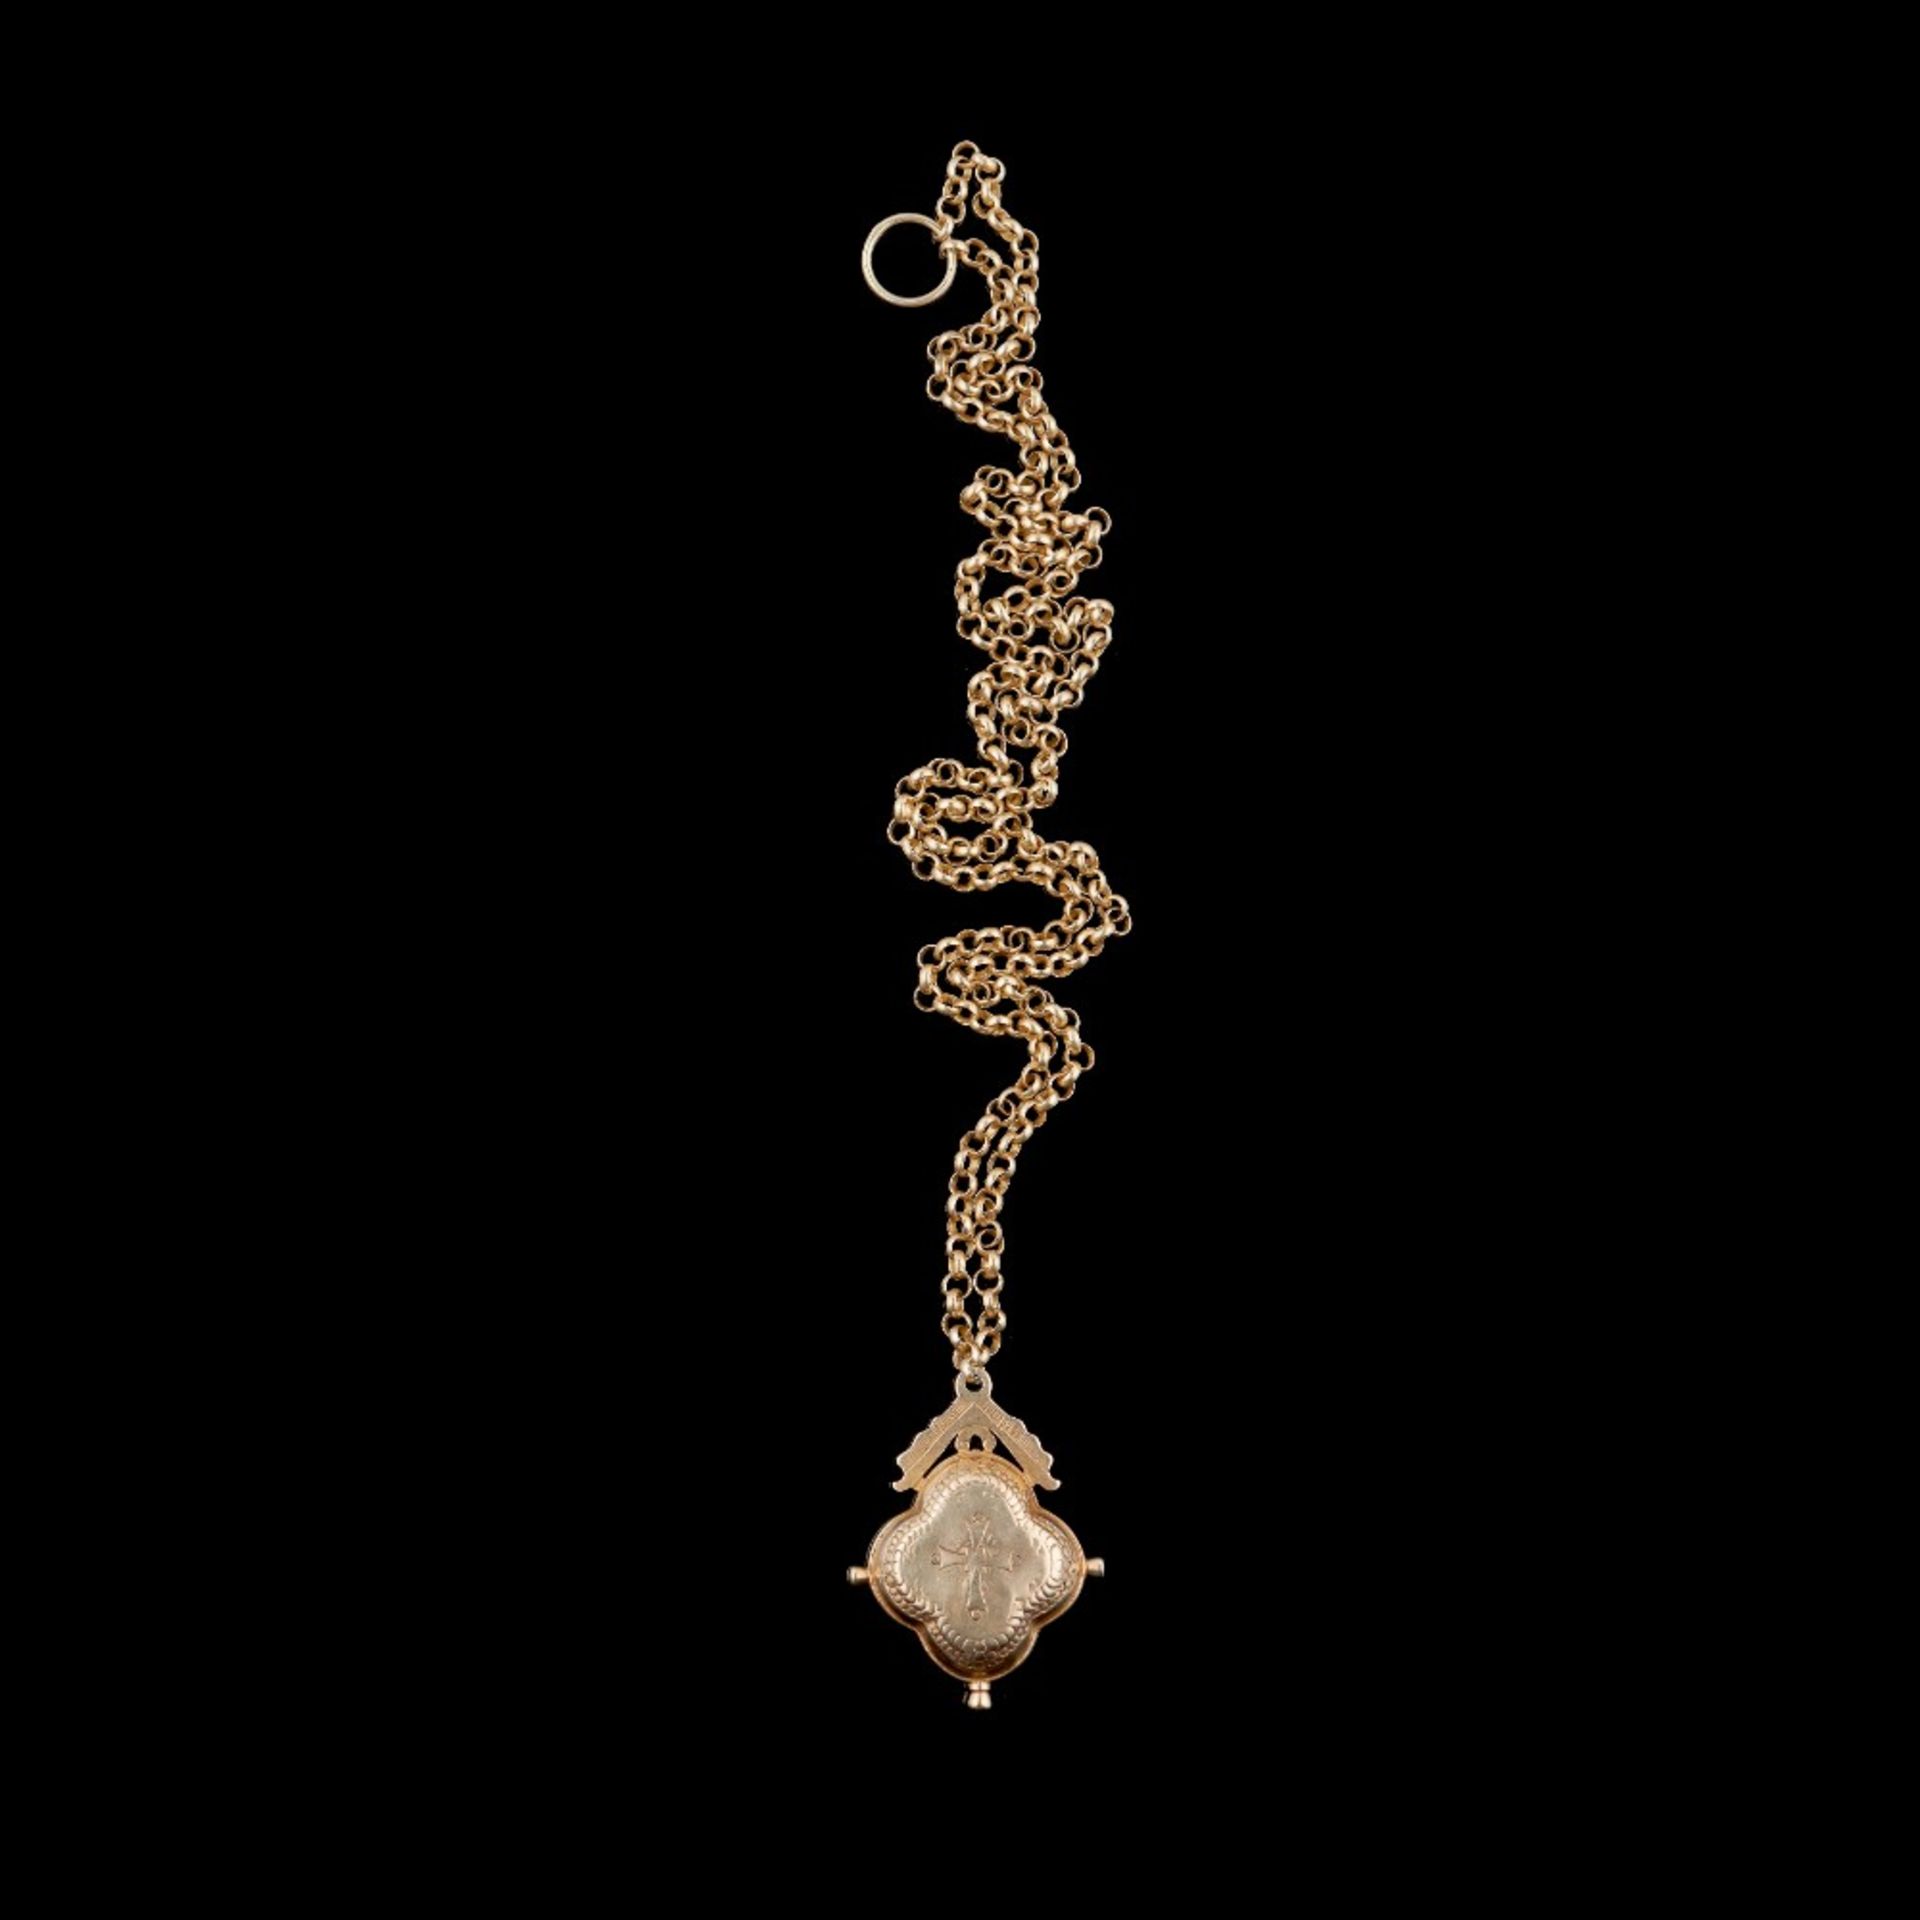  A pendant with reliquary